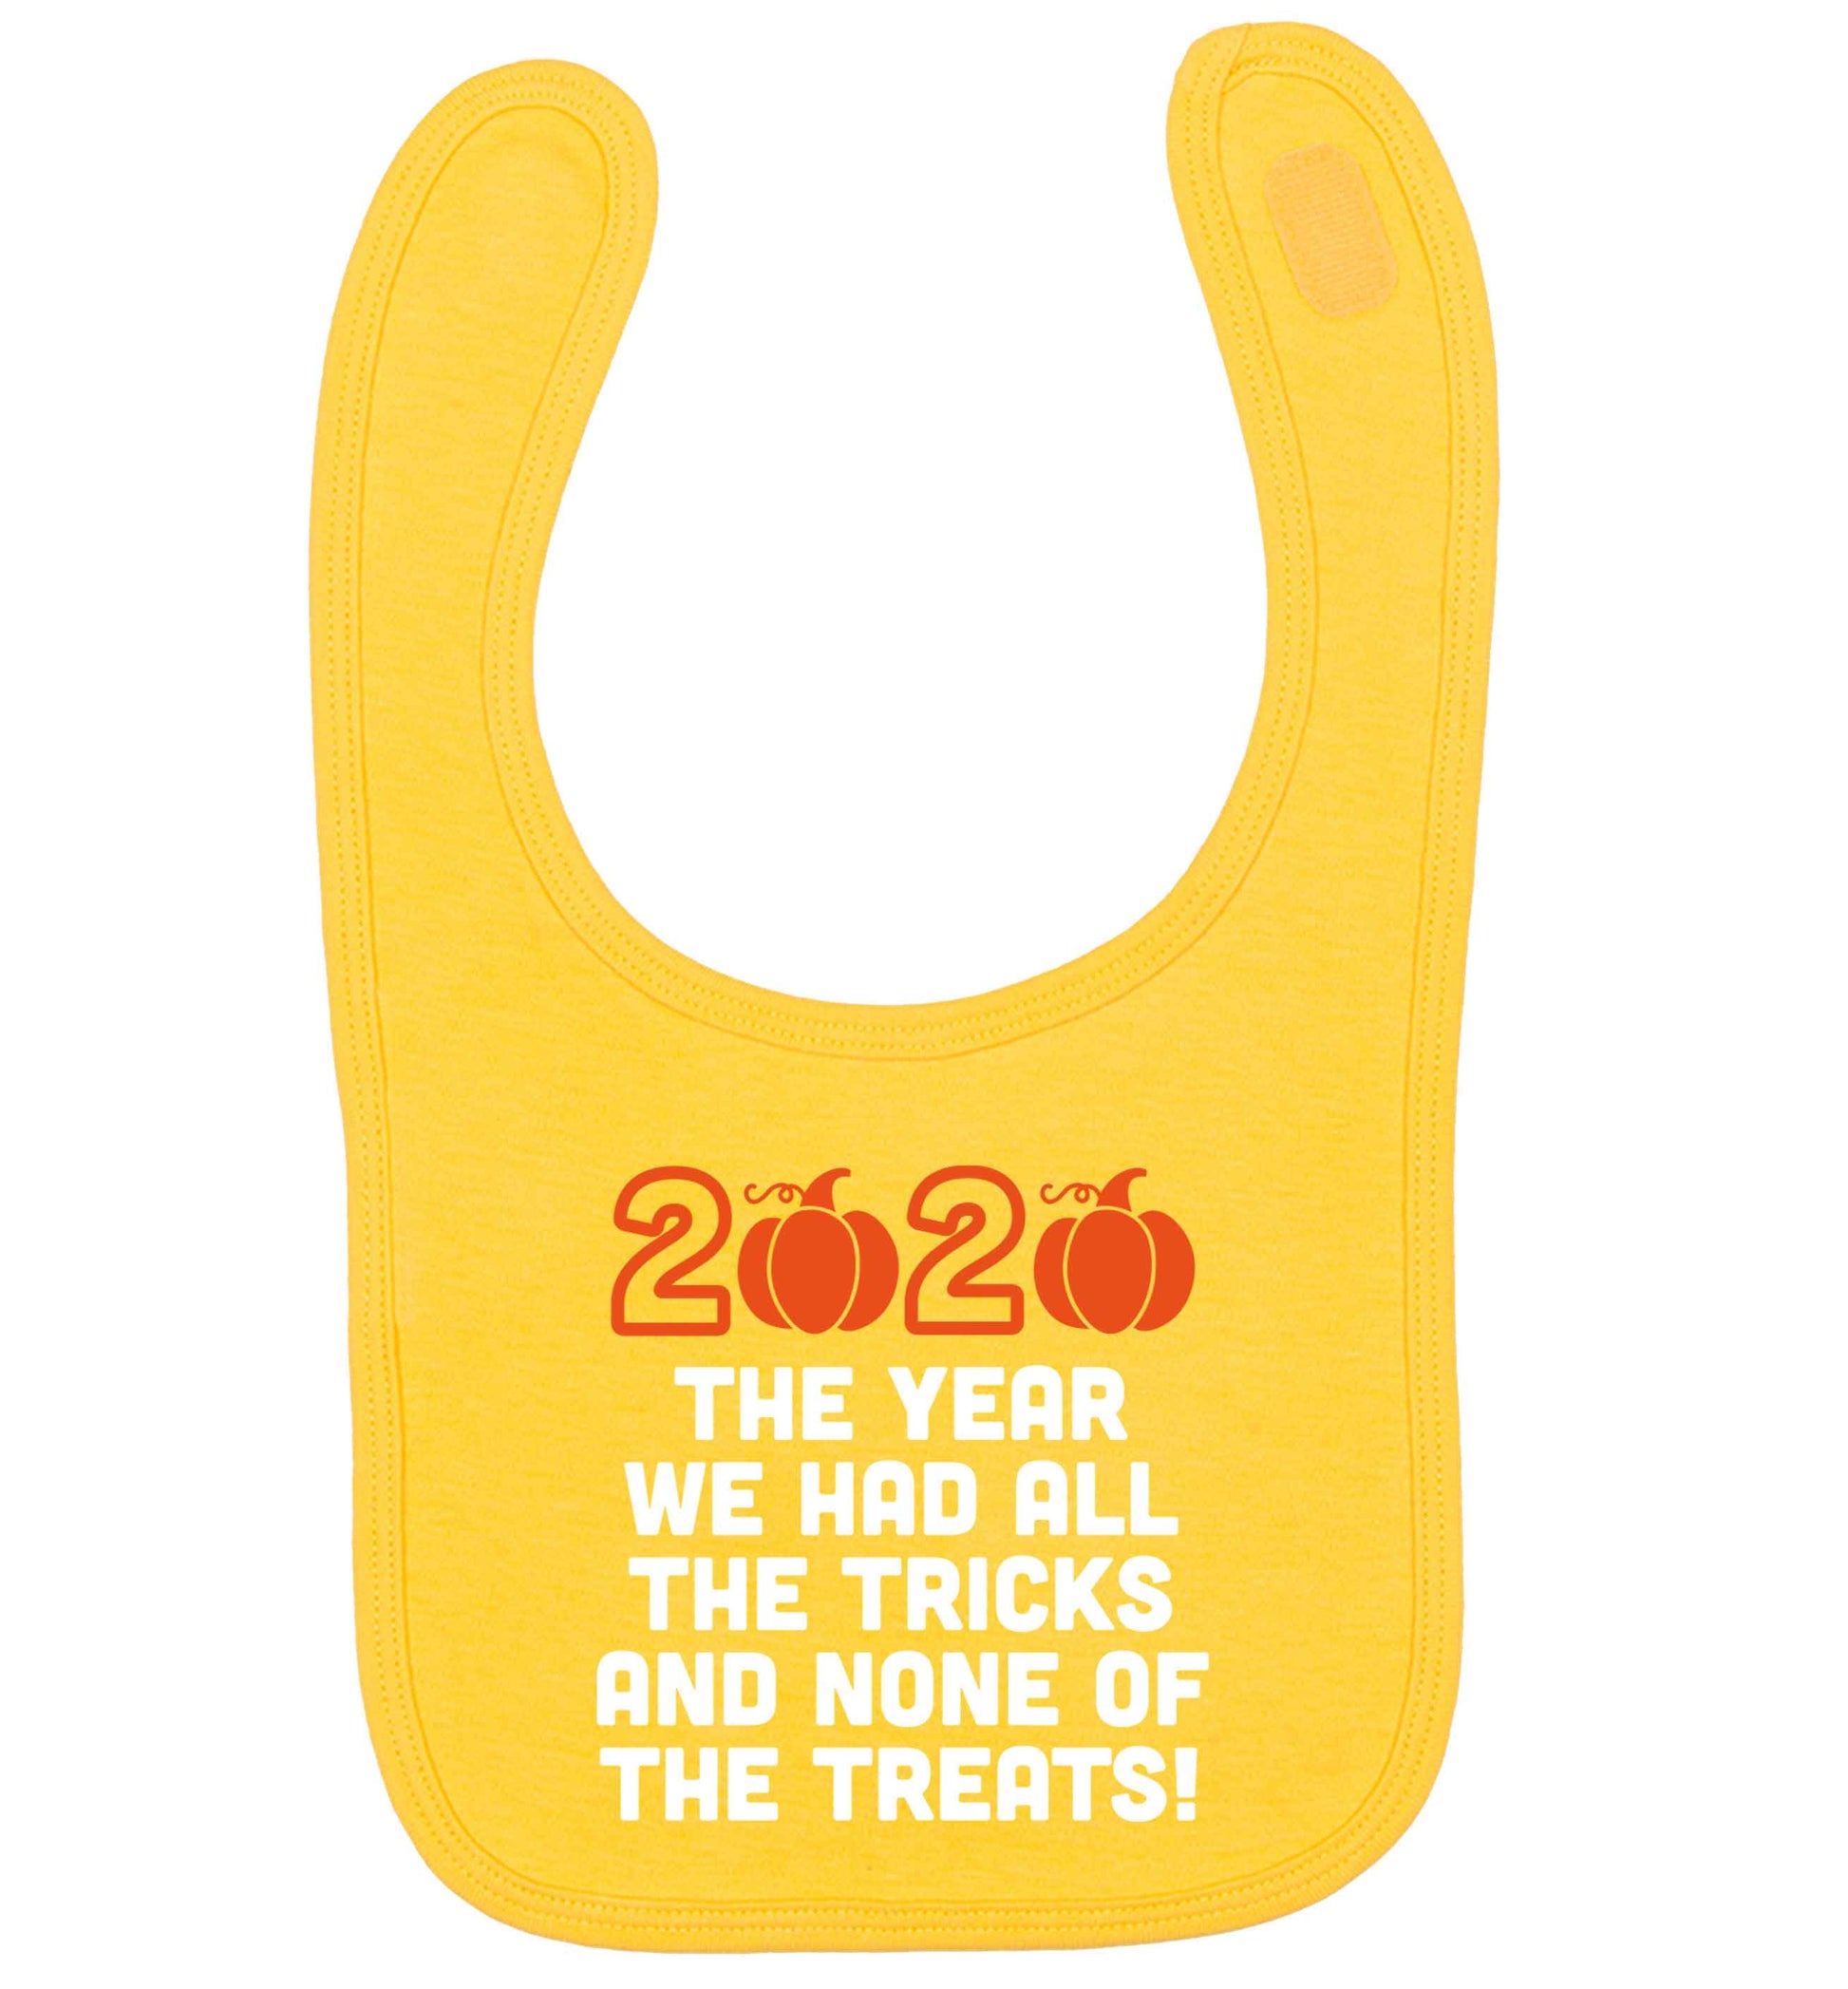 2020 The year we had all of the tricks and none of the treats yellow baby bib